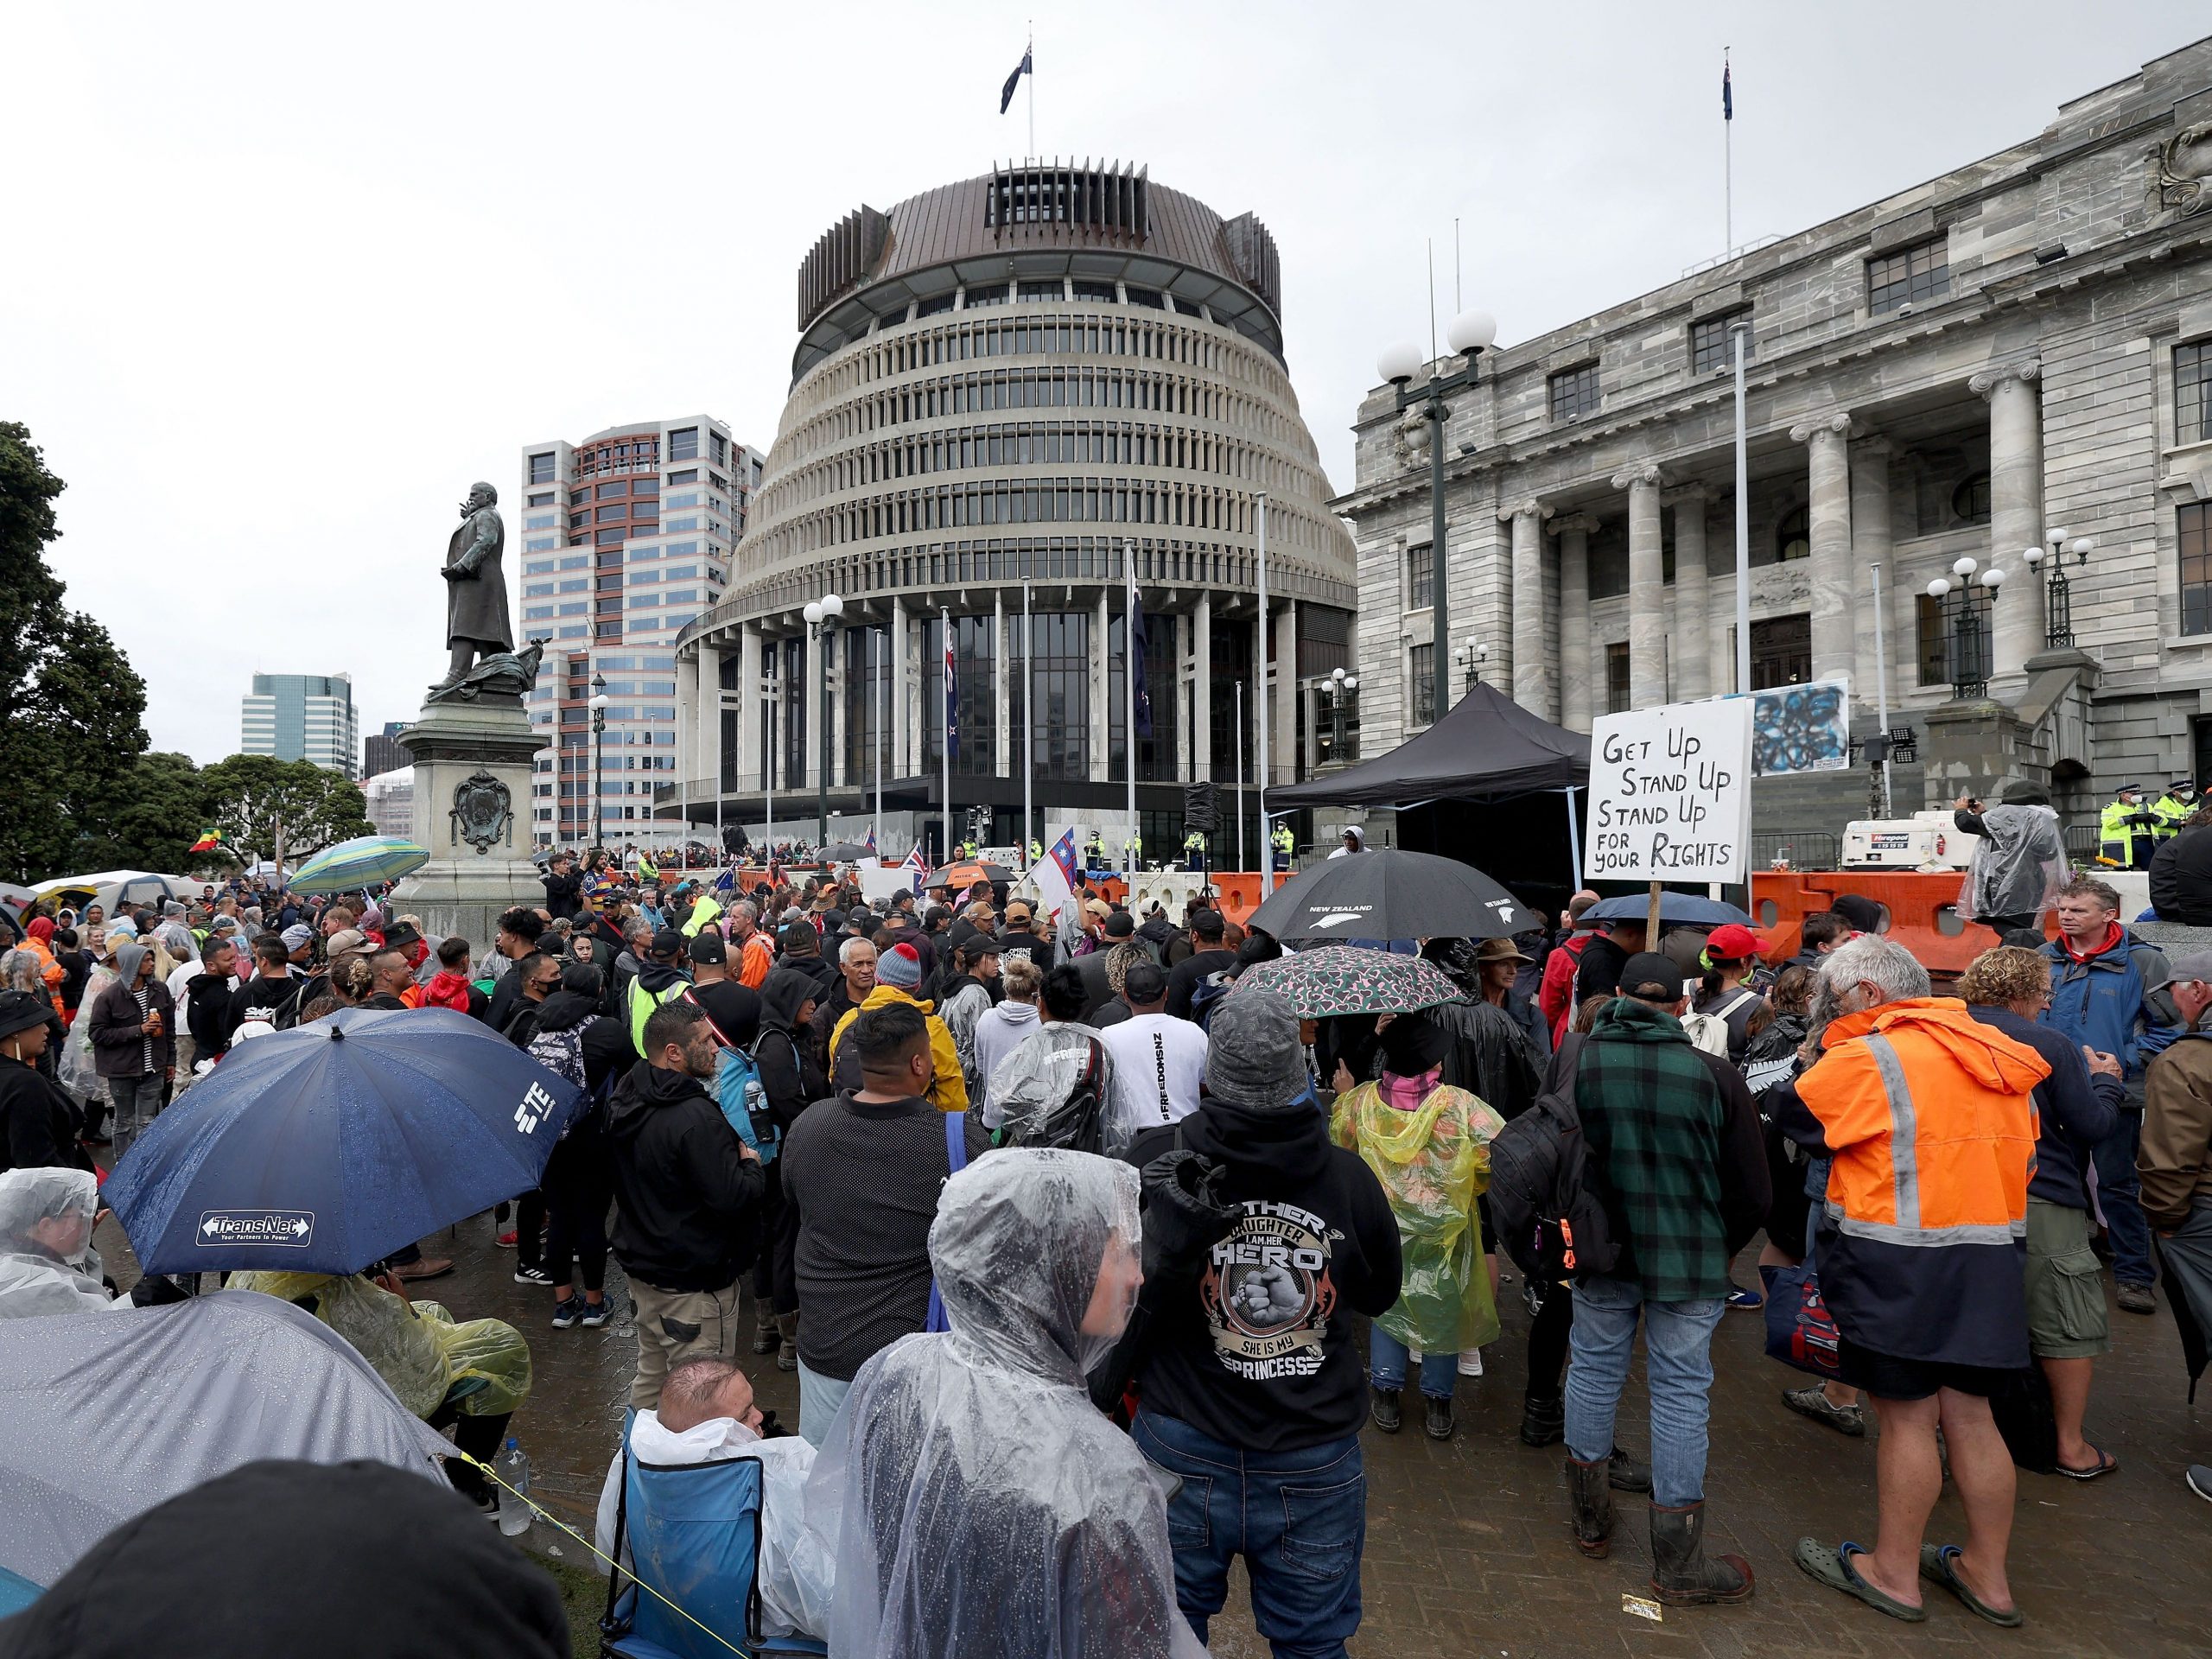 Protesters pack into the grounds of Parliament on the fifth day of demonstrations against Covid-19 restrictions in Wellington on February 12, 2022, inspired by a similar demonstration in Canada.